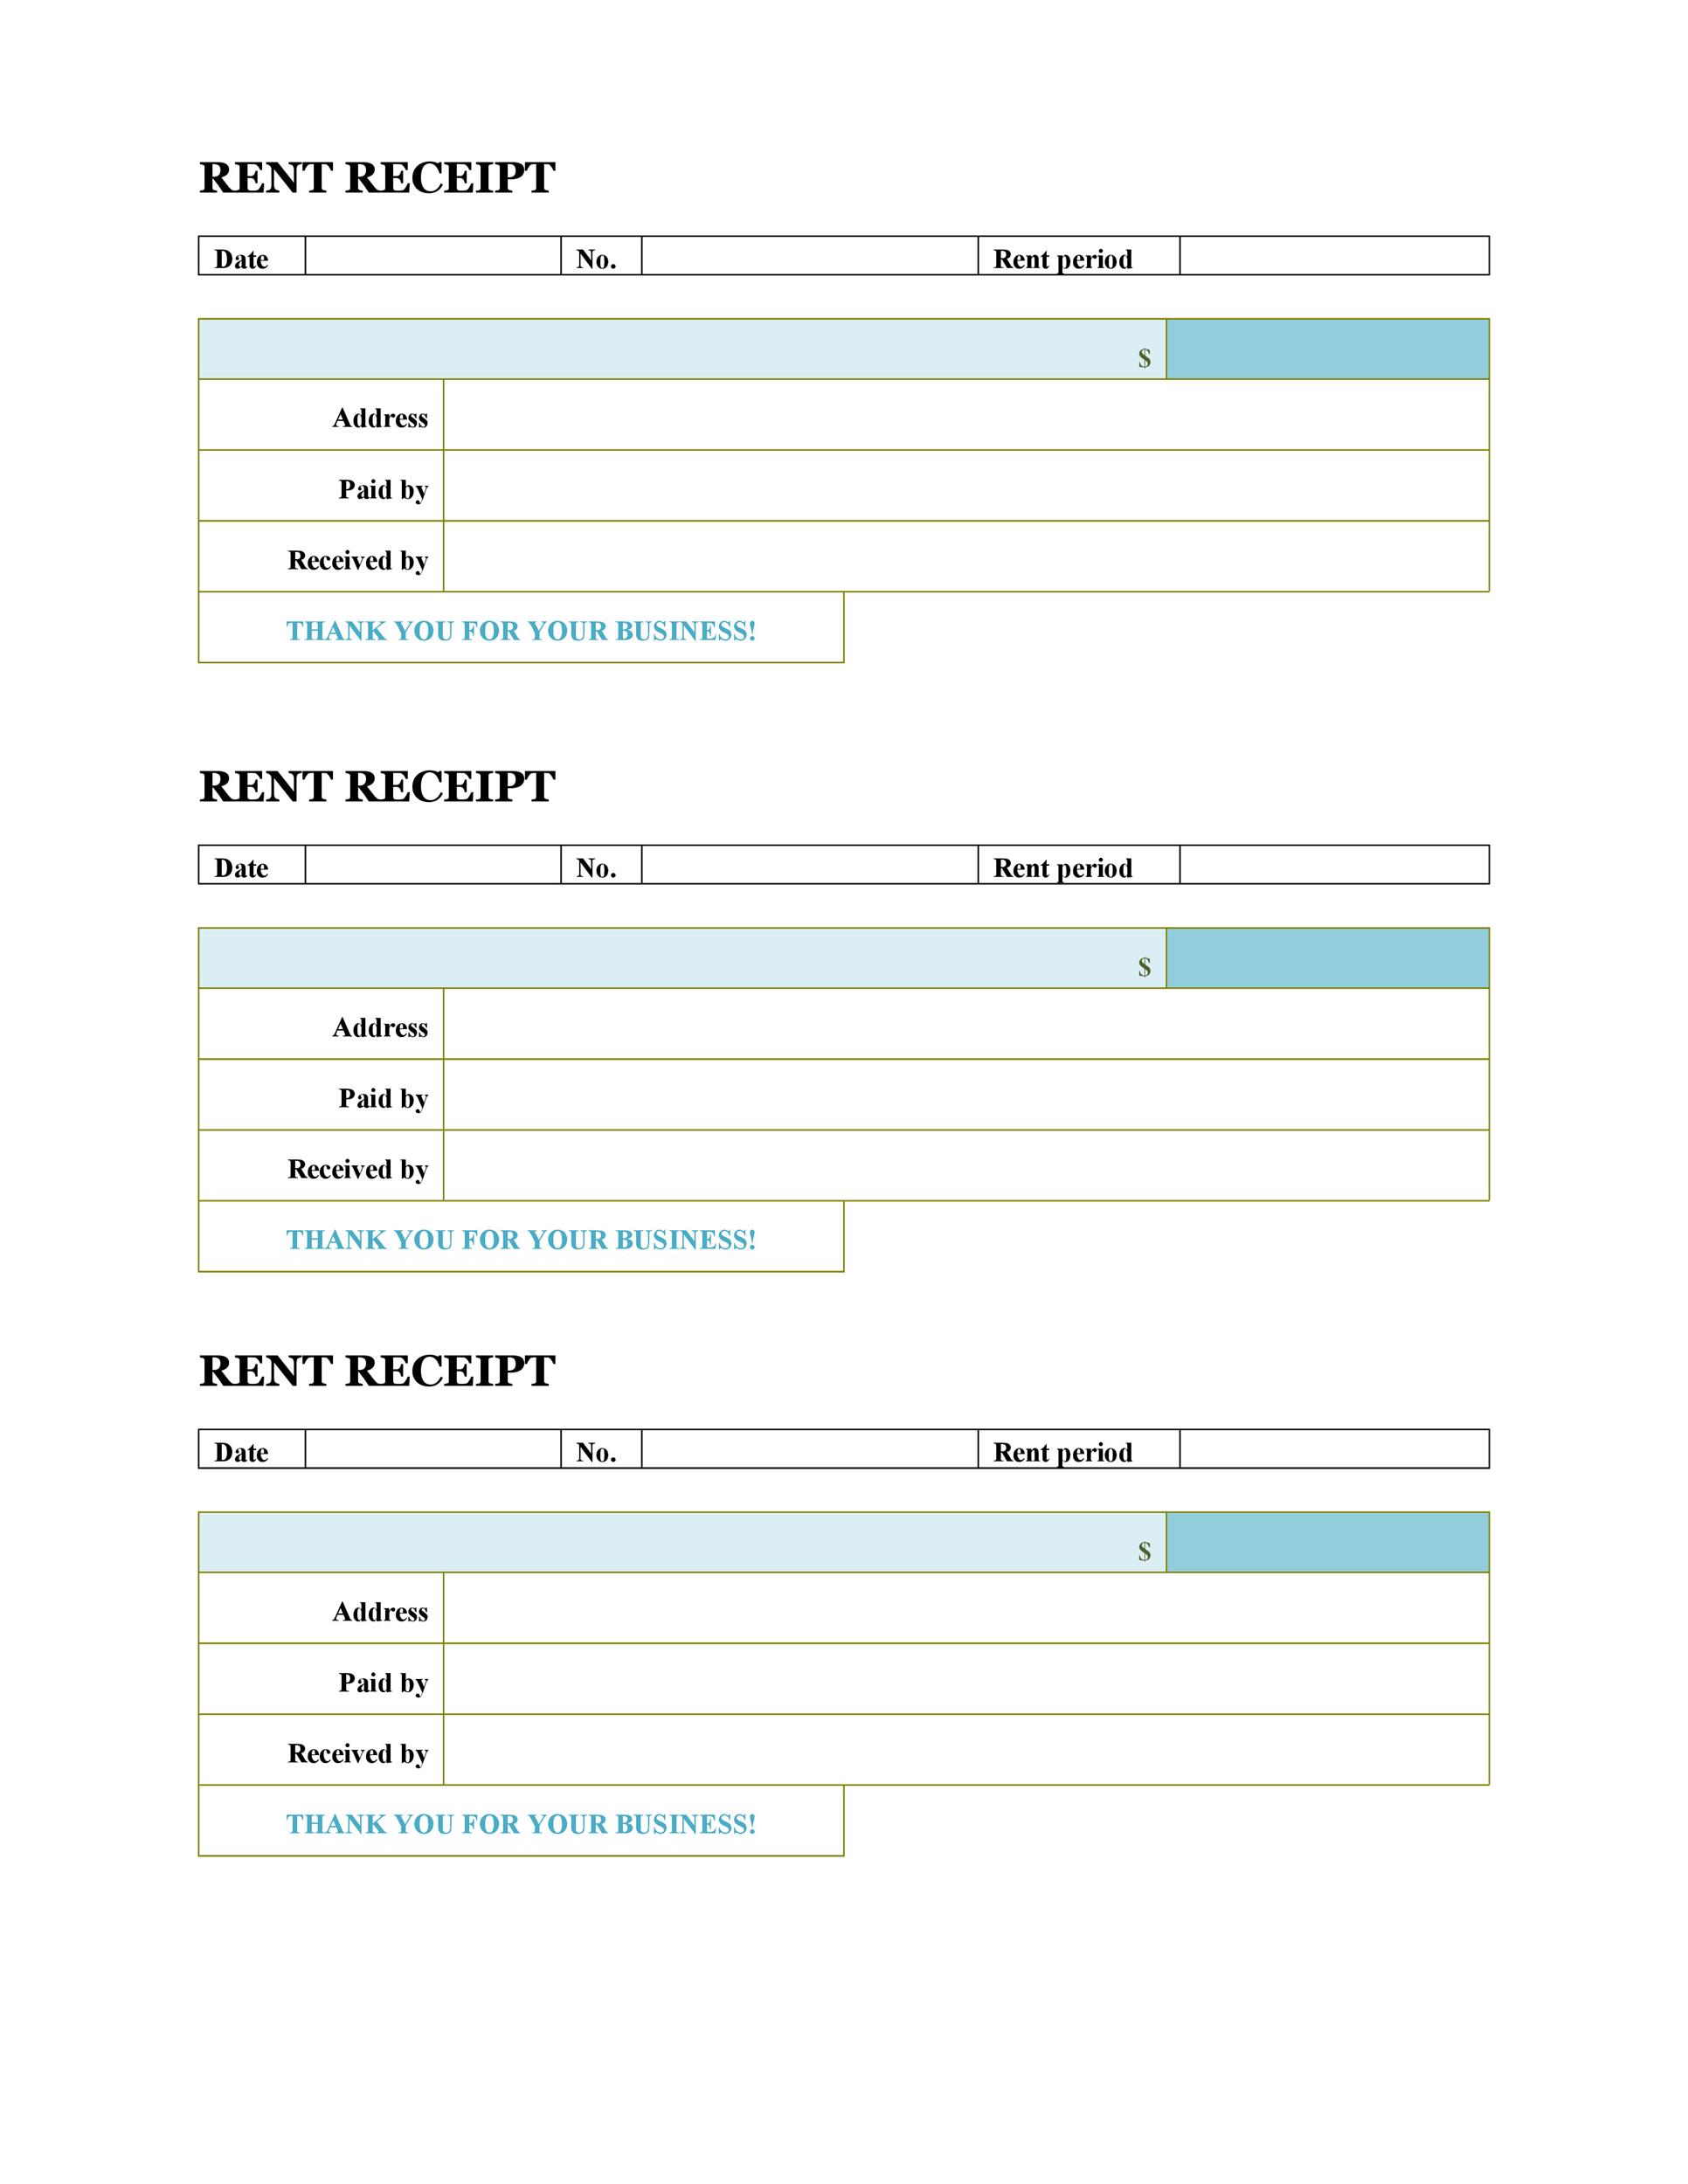 rent-receipt-format-india-word-document-download-free-online-document